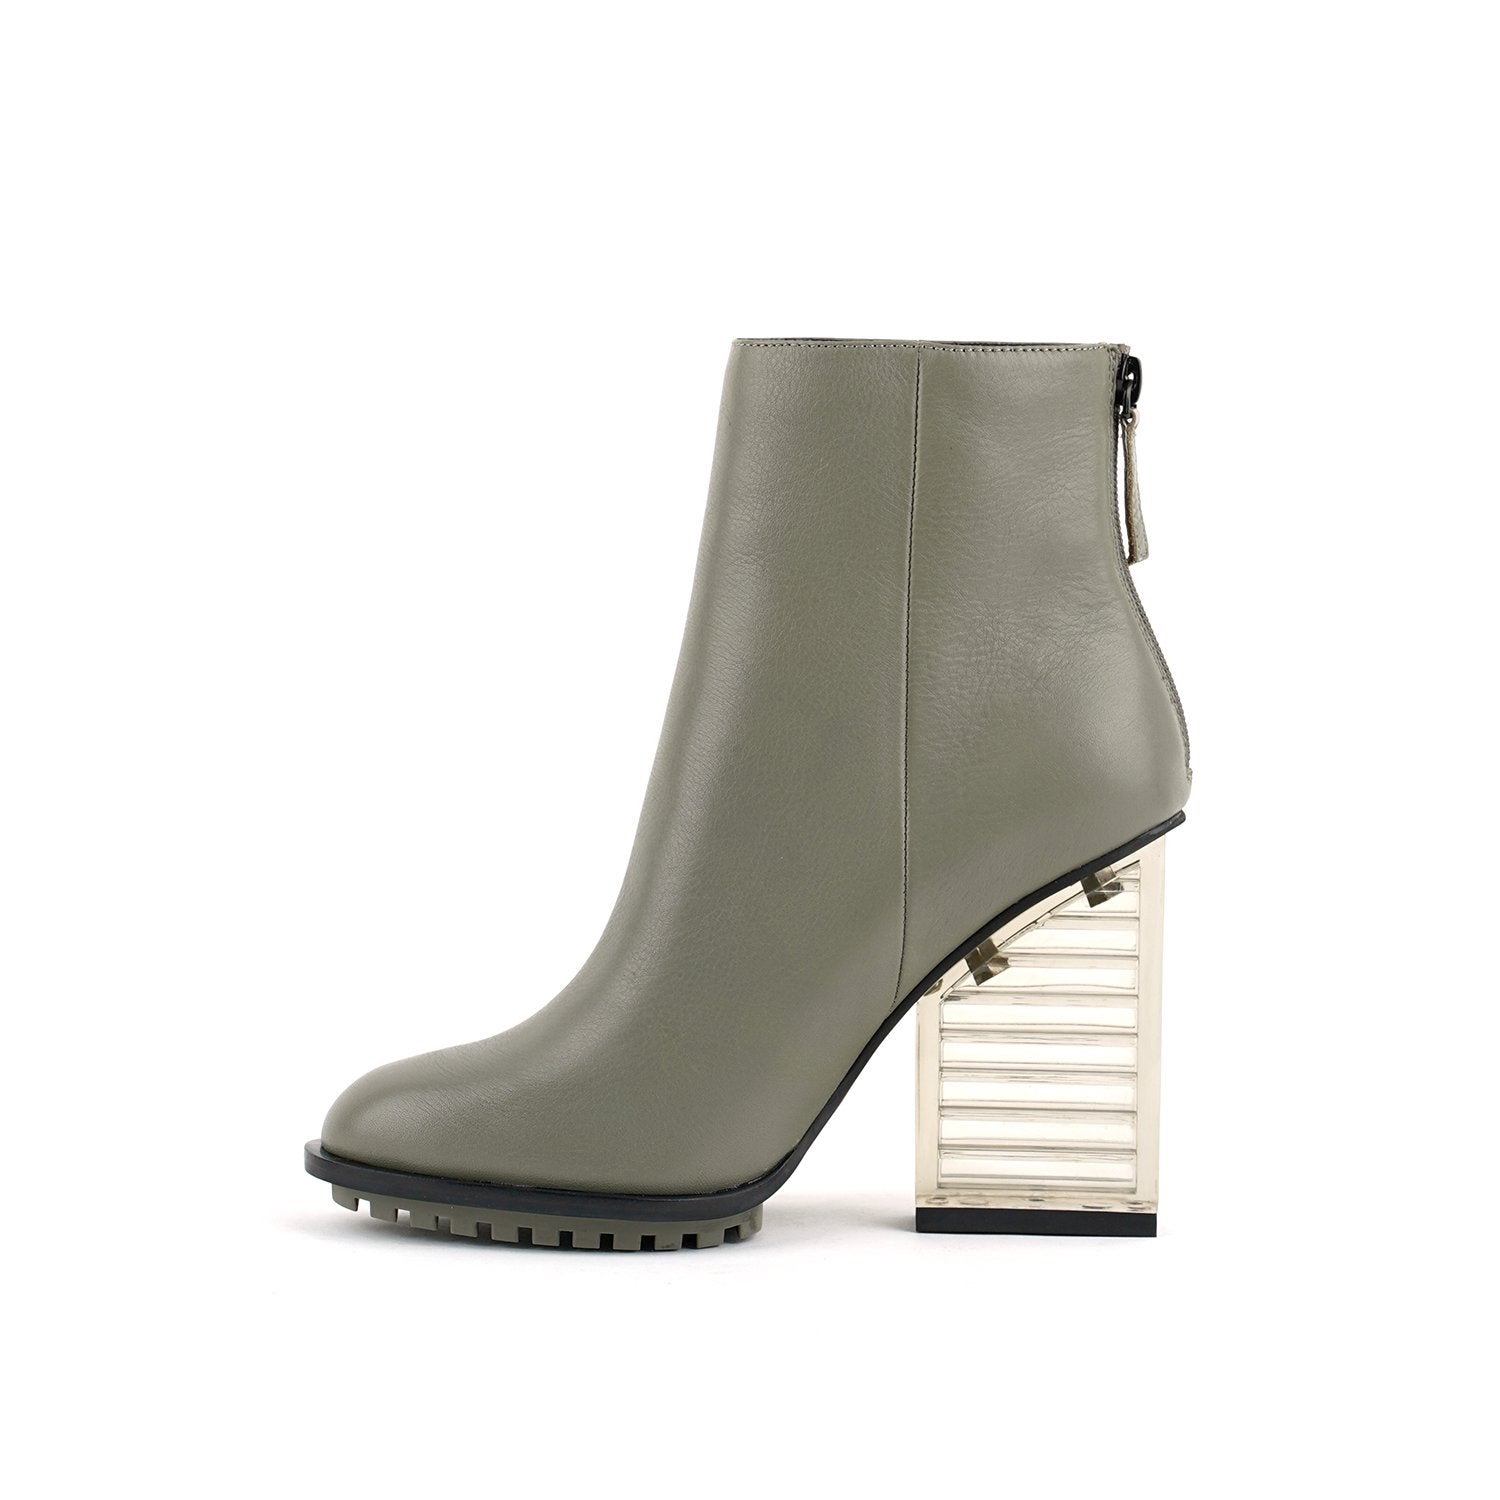 Inner side view of the united nude hi rise bootie. This bootie is grey with a glass like see-through, block shaped high heel. The bootie is an ankle bootie with a back zipper.